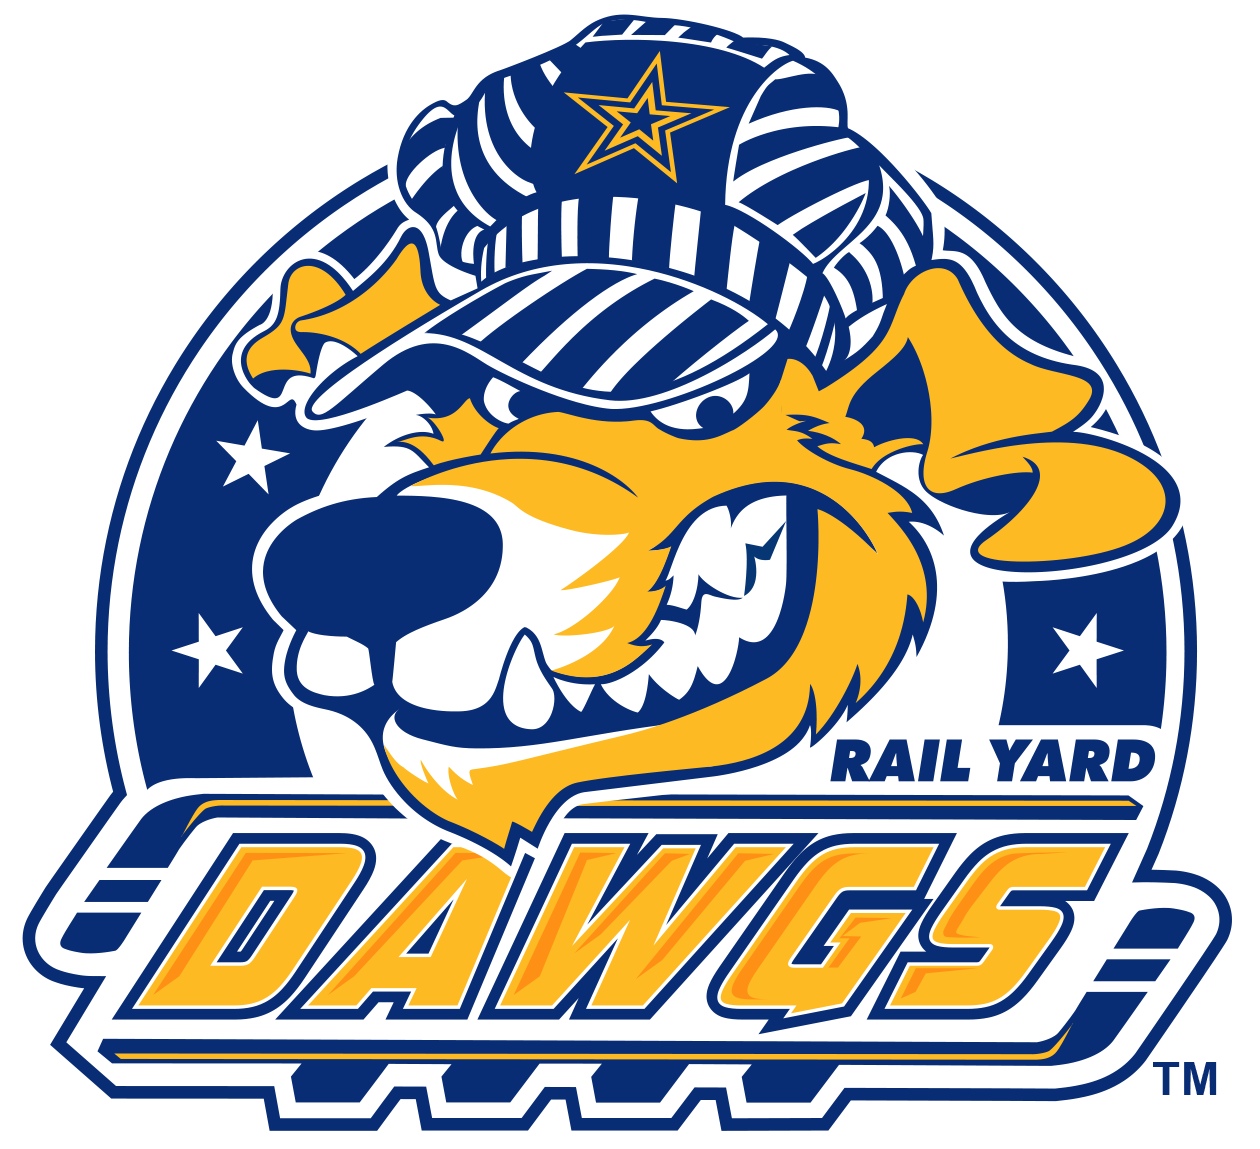 Rail Yard Dawgs Introduce New Logo, Jersey Design OurSports Central